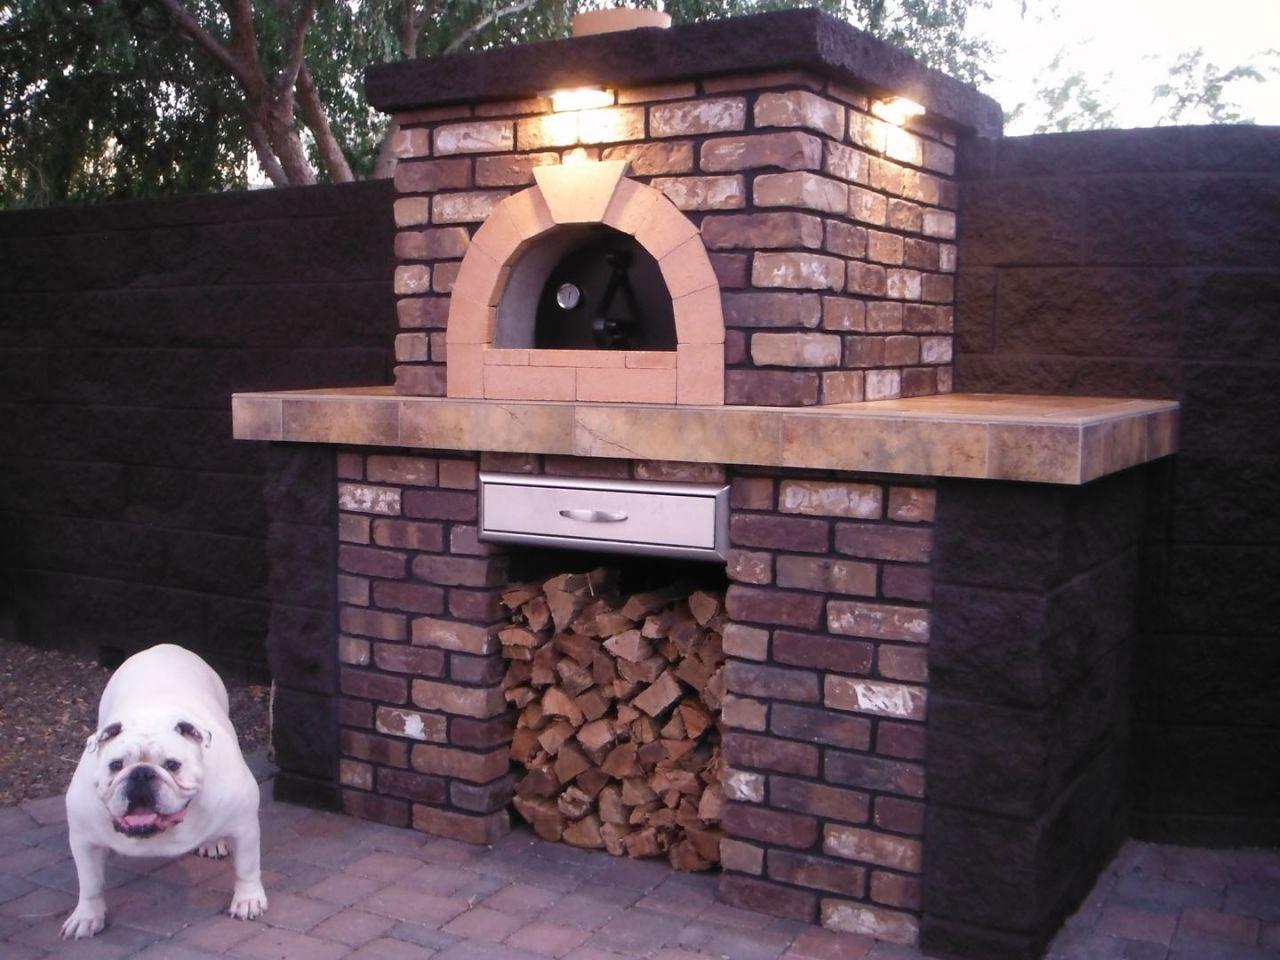 Wondering if a custom fireplace would look good in your backyard? Pryor